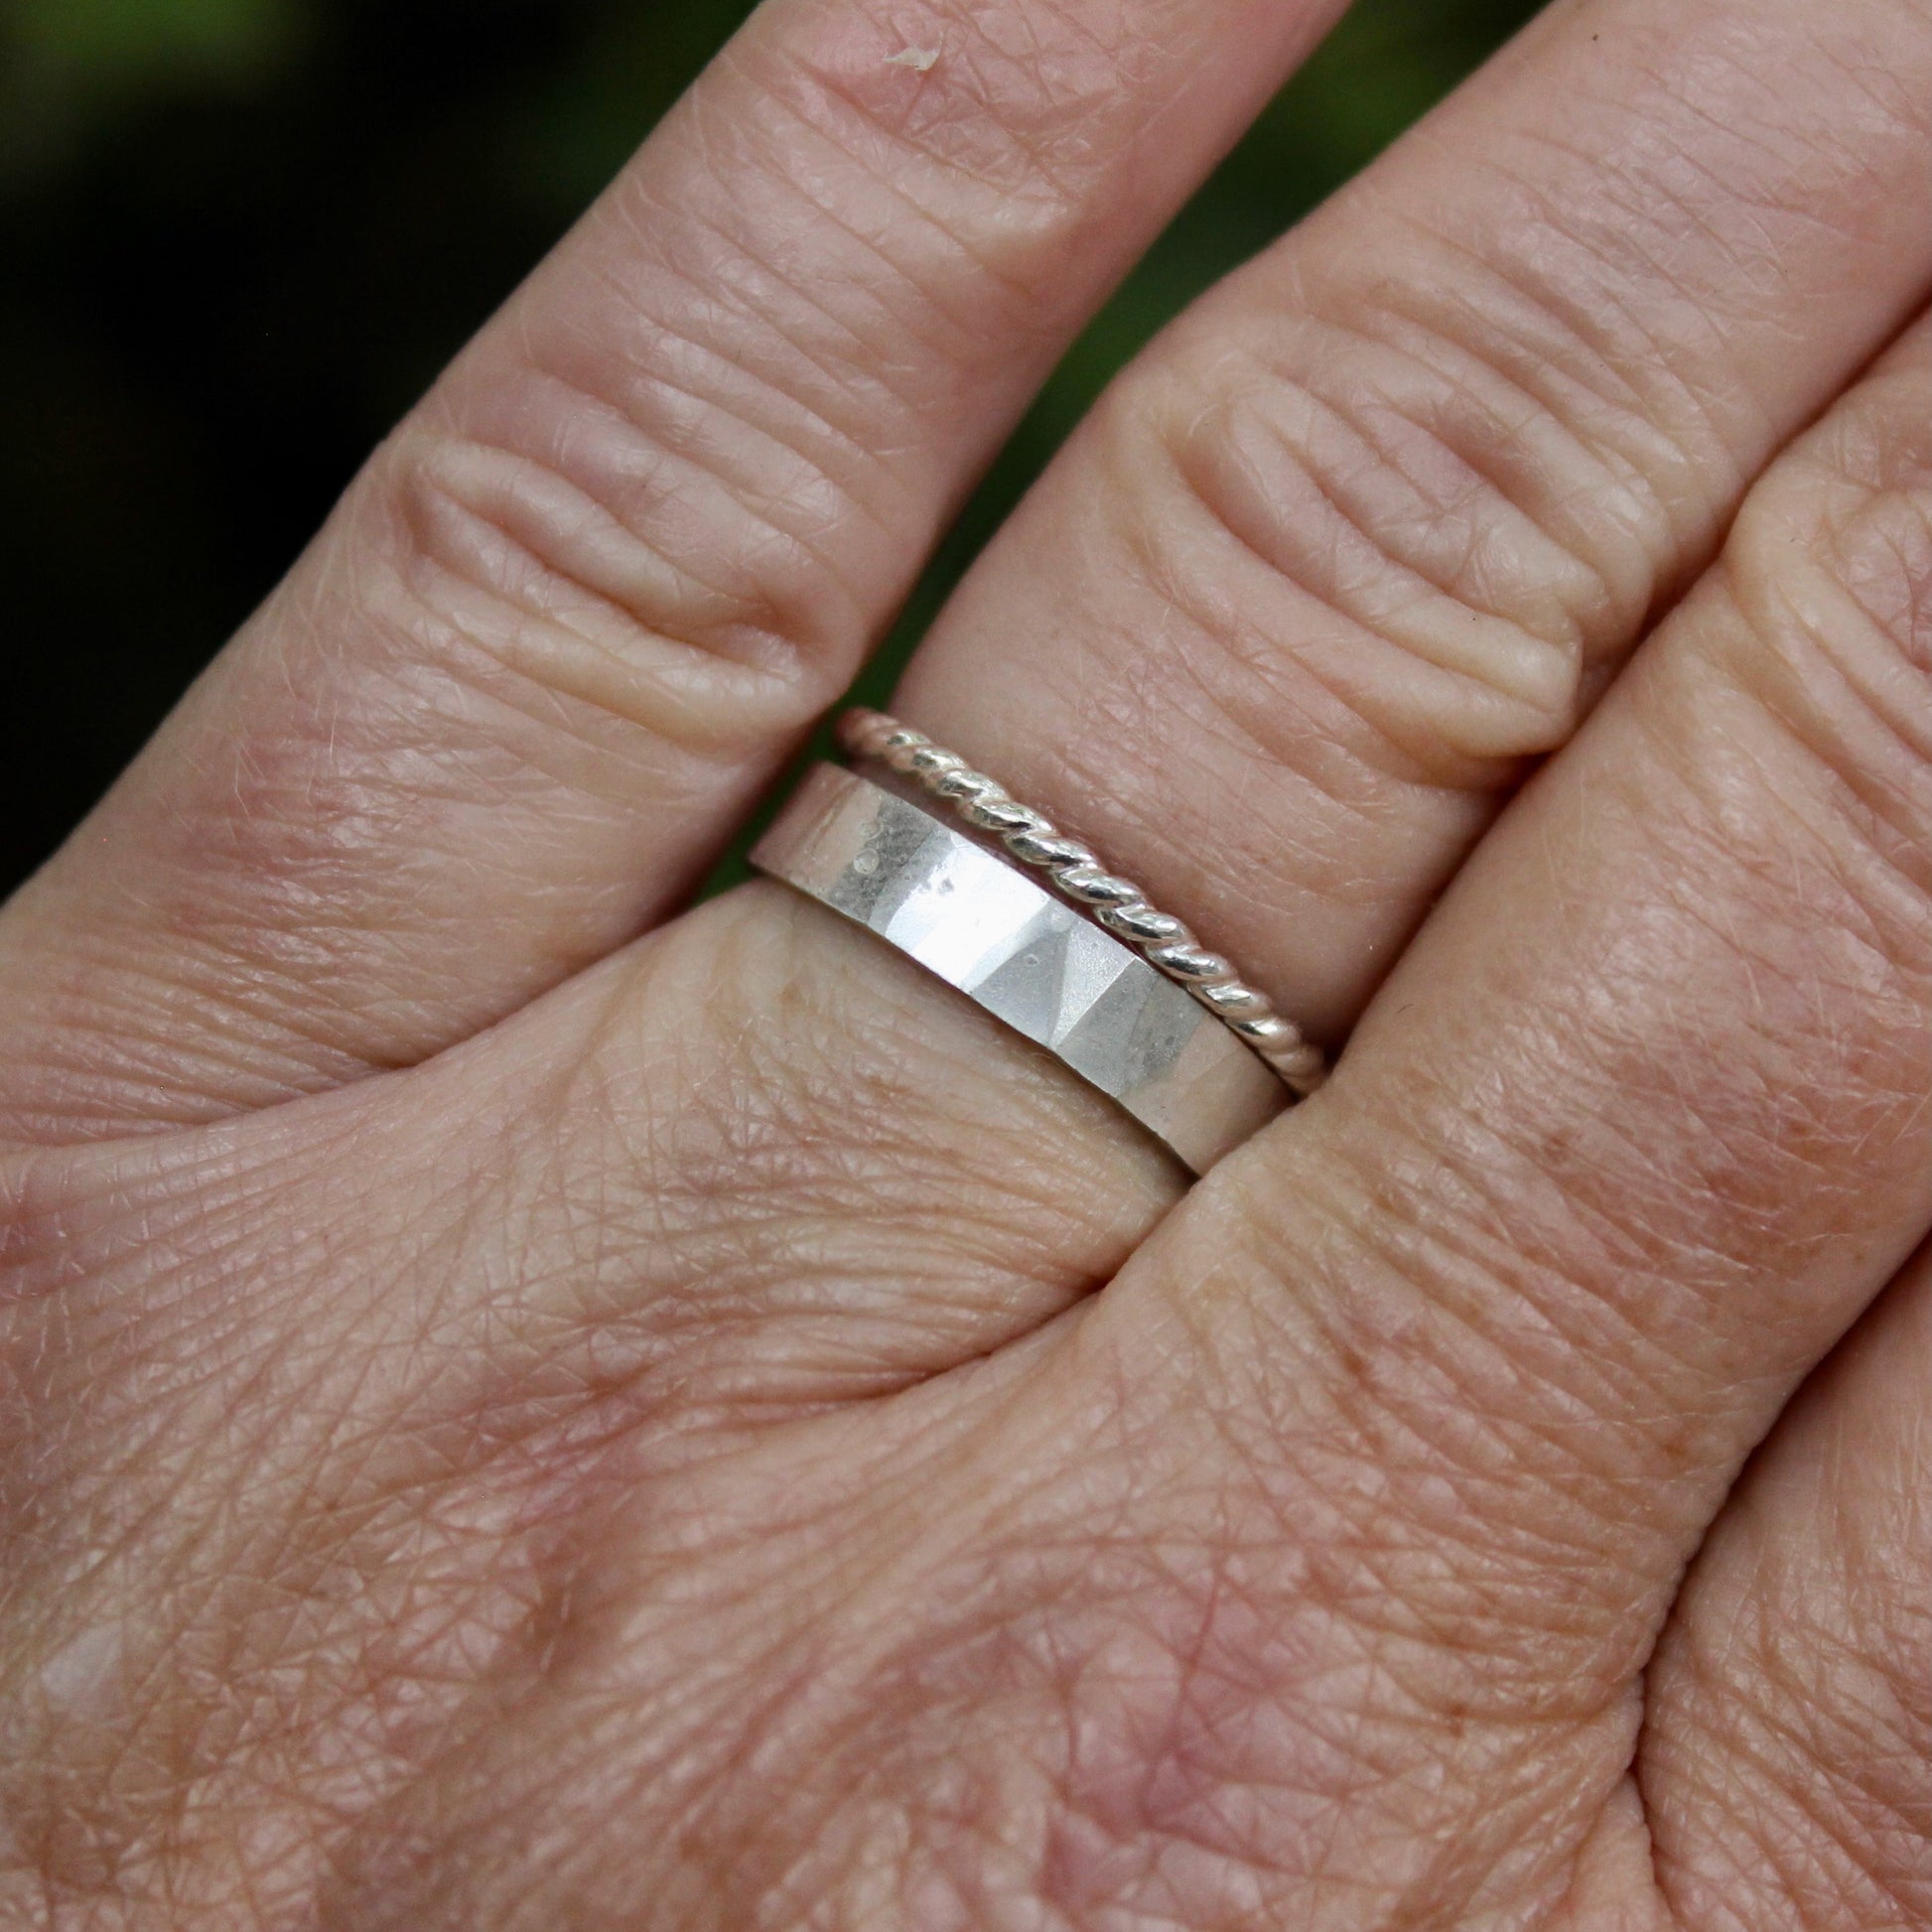 A handmade 4mm wide x 1mm thick flat sterling silver band with a hammered texture and bright finish. Shown with a twisted wire stacking ring. 